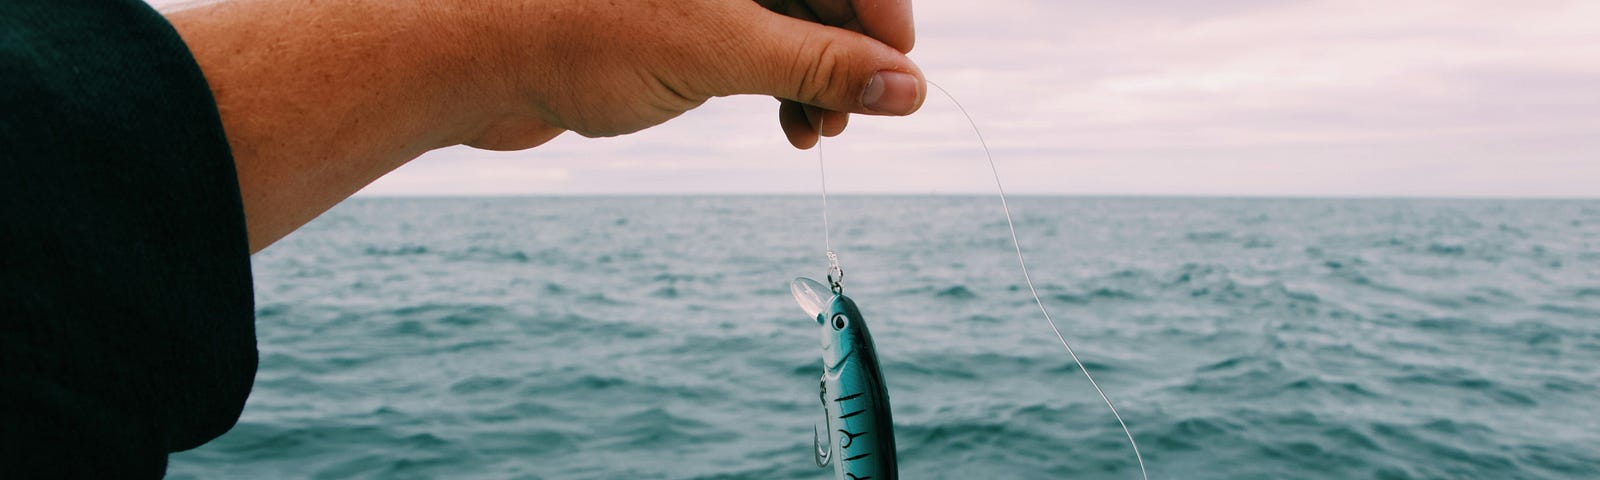 Image of a hand holding a fish hook that looks like a small fish.